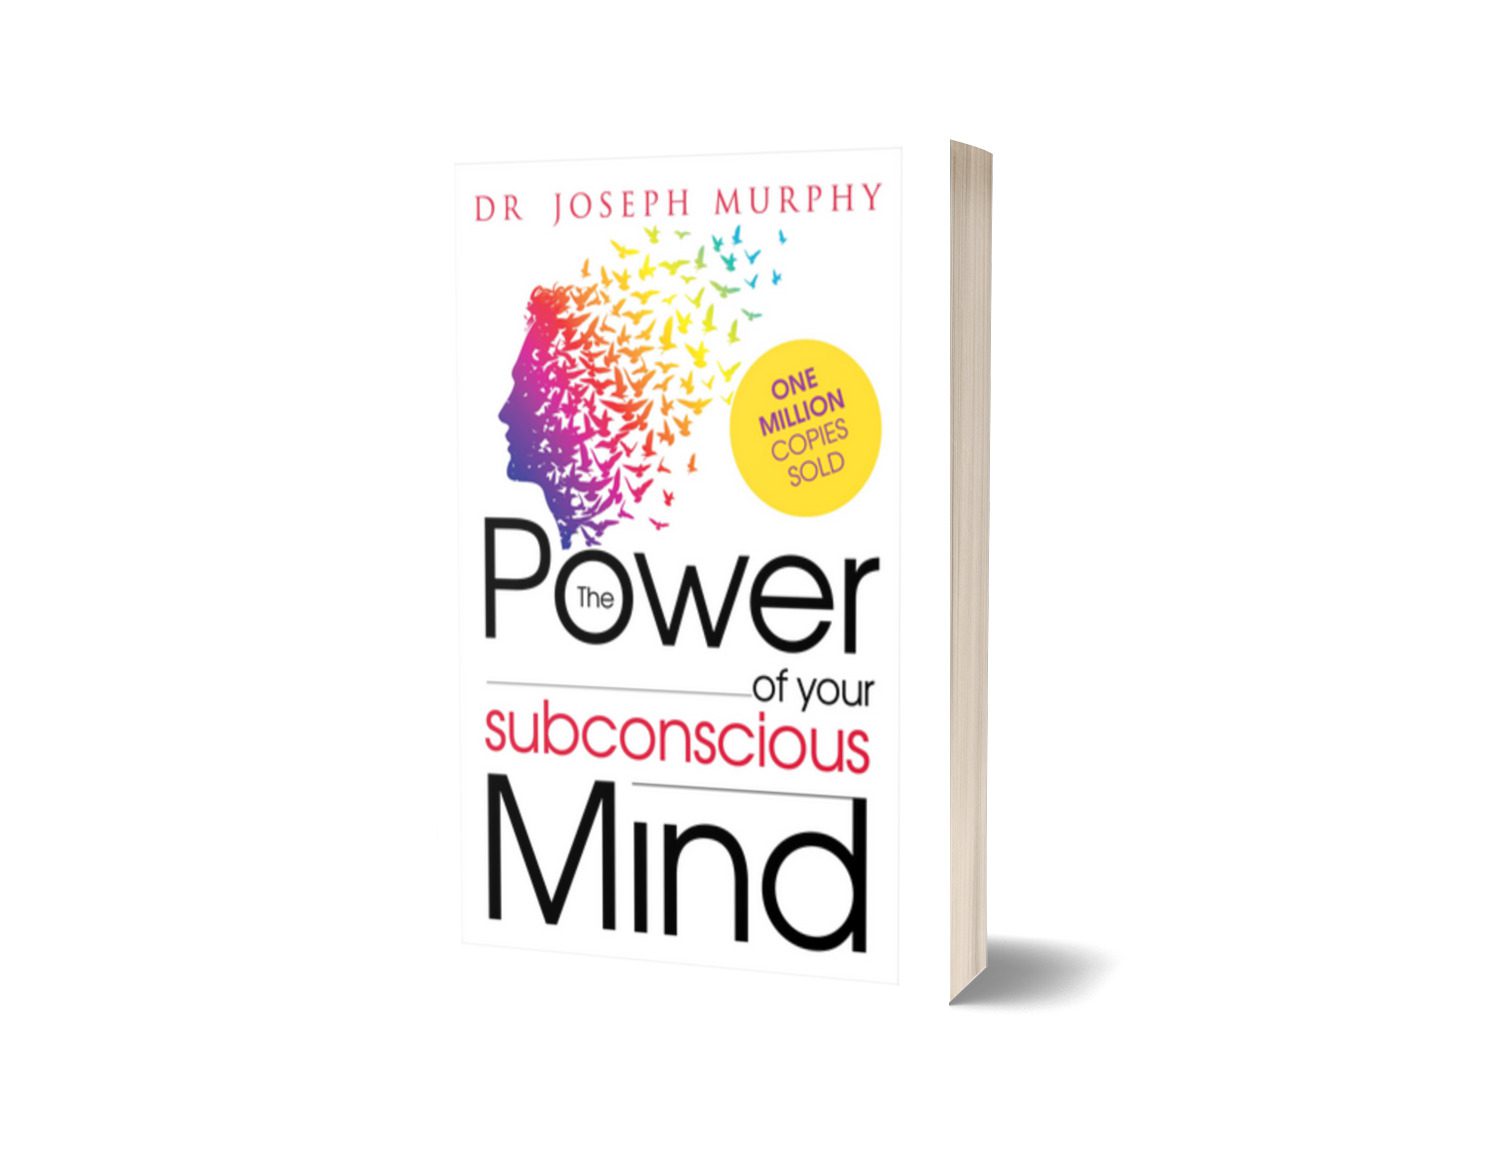 book review power of subconscious mind